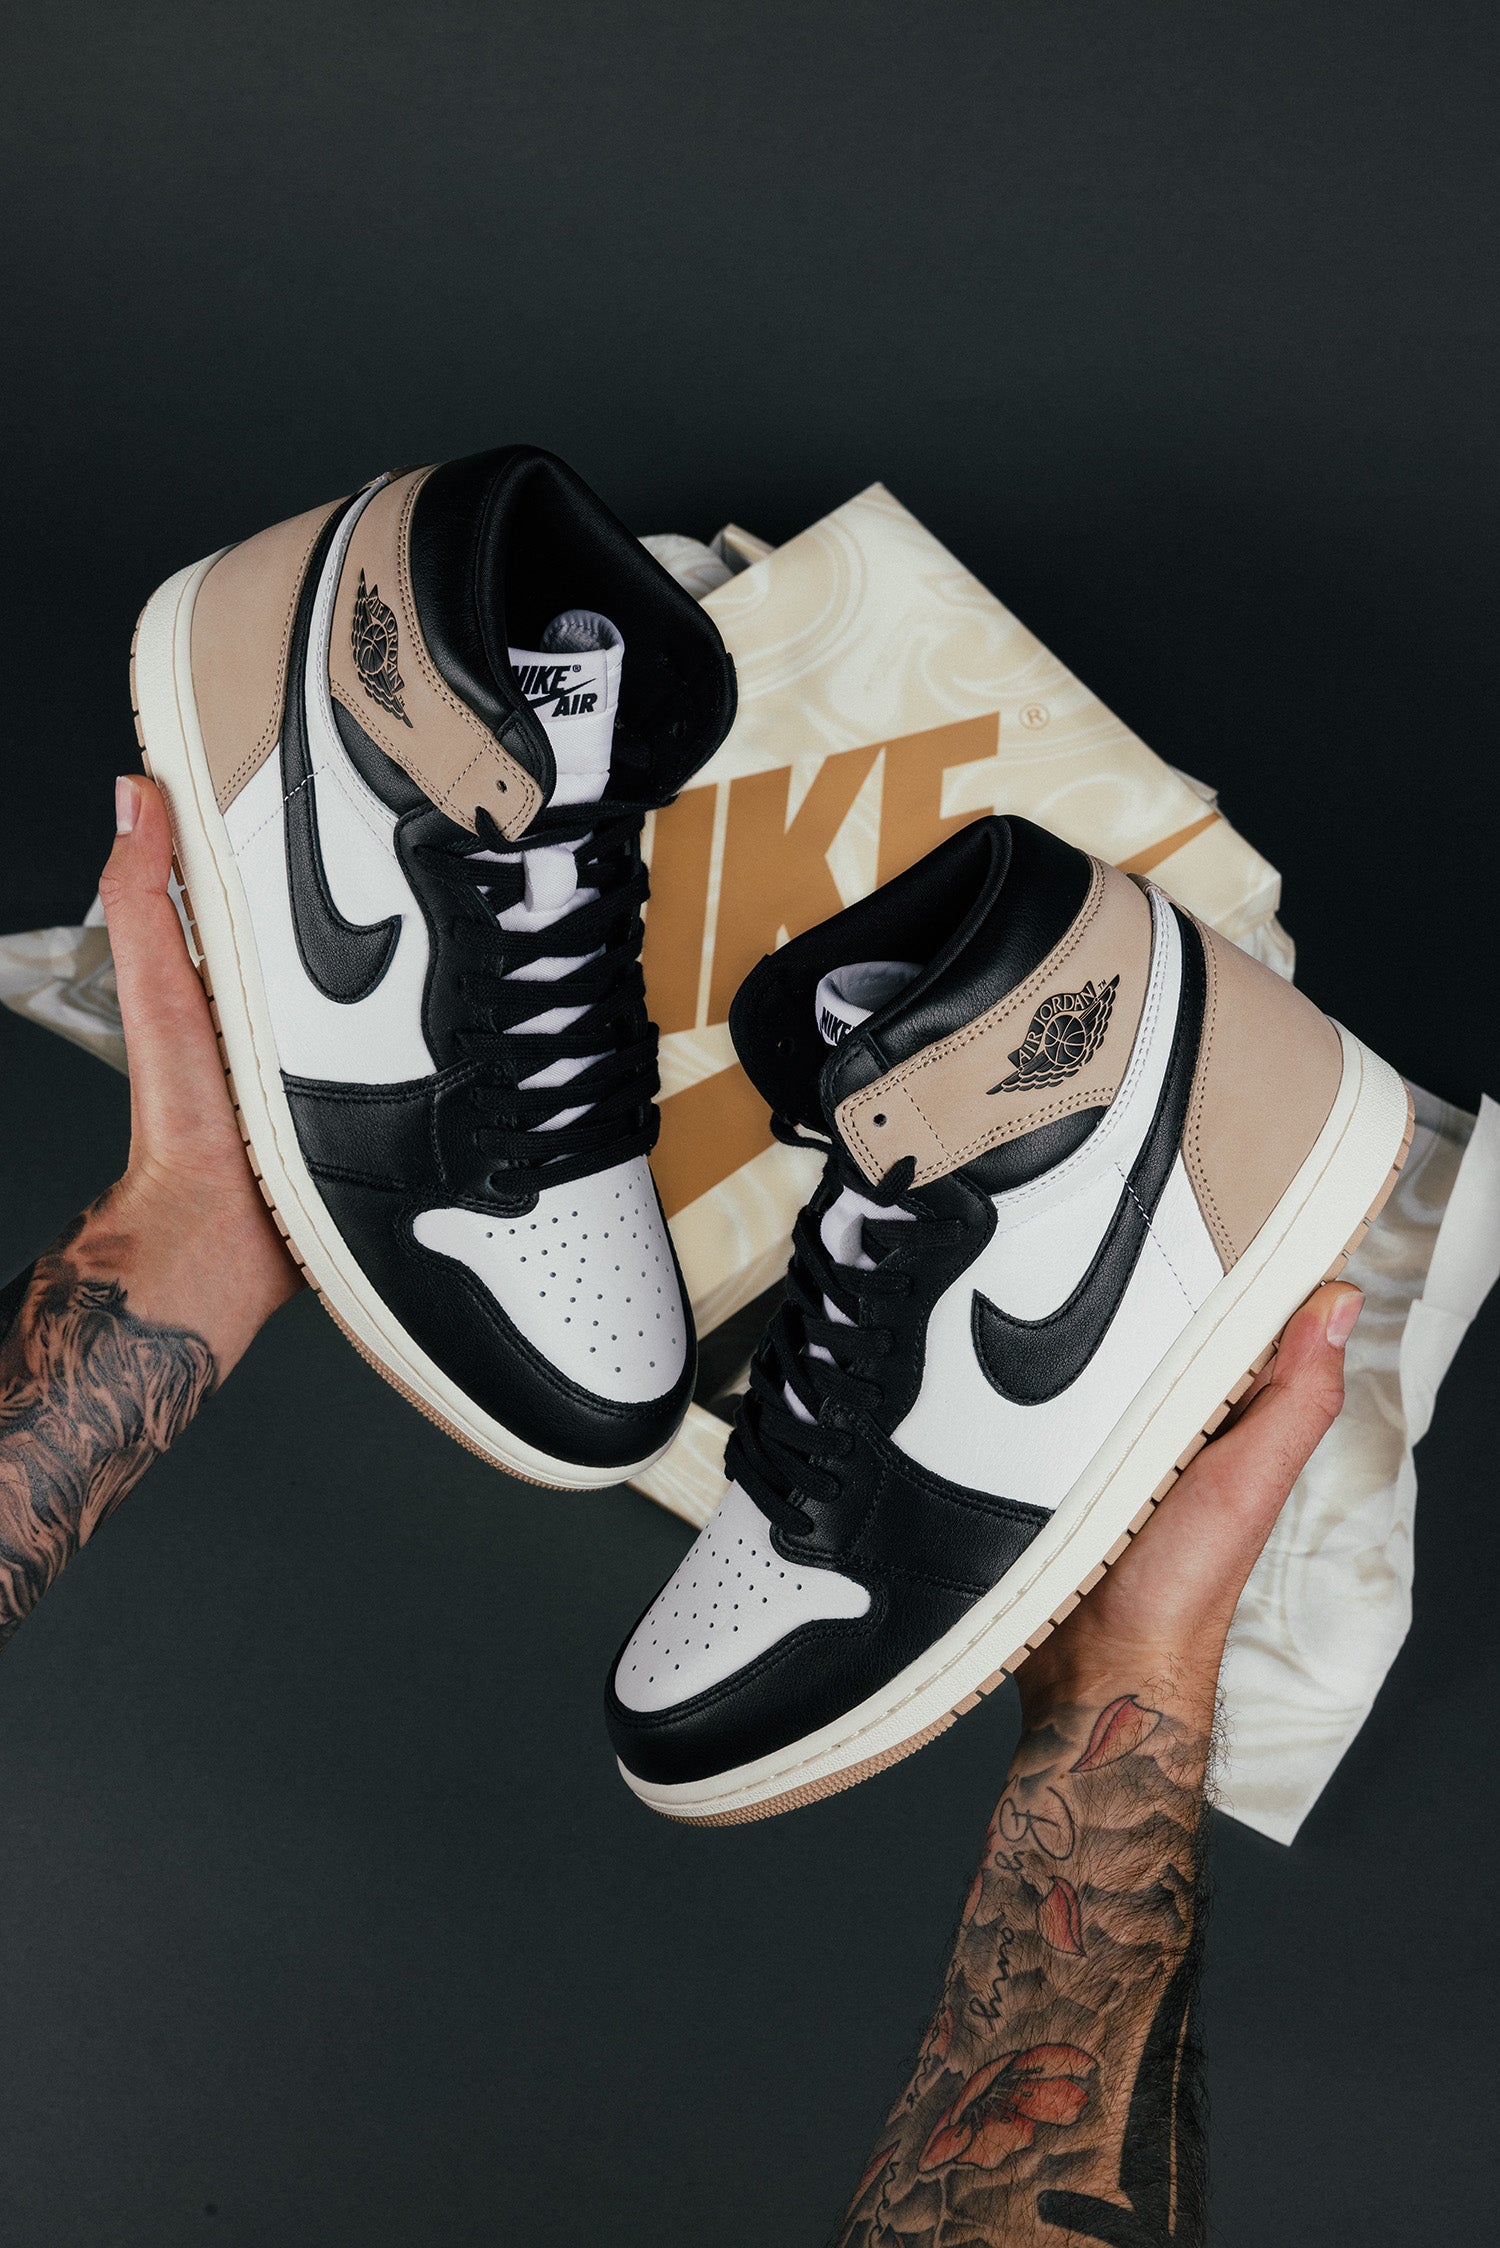 Discover the Exclusive Jordan 1 Retro High OG 'Latte' at Common Hype